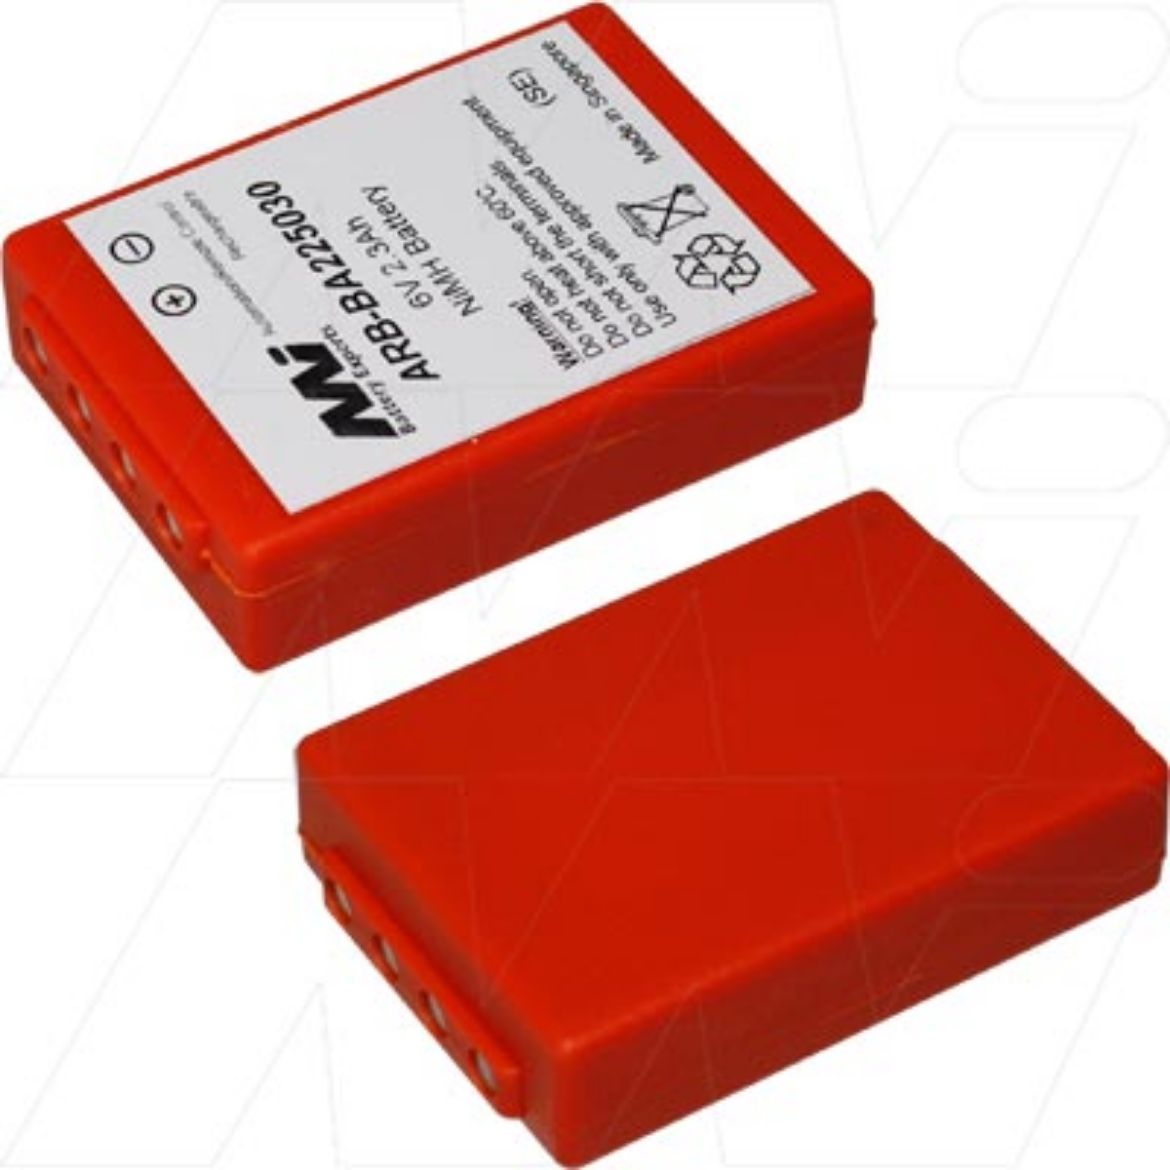 Picture of ARB-BA225030 CRANE REMOTE BATTERY -  6V 2.3AH NIMH